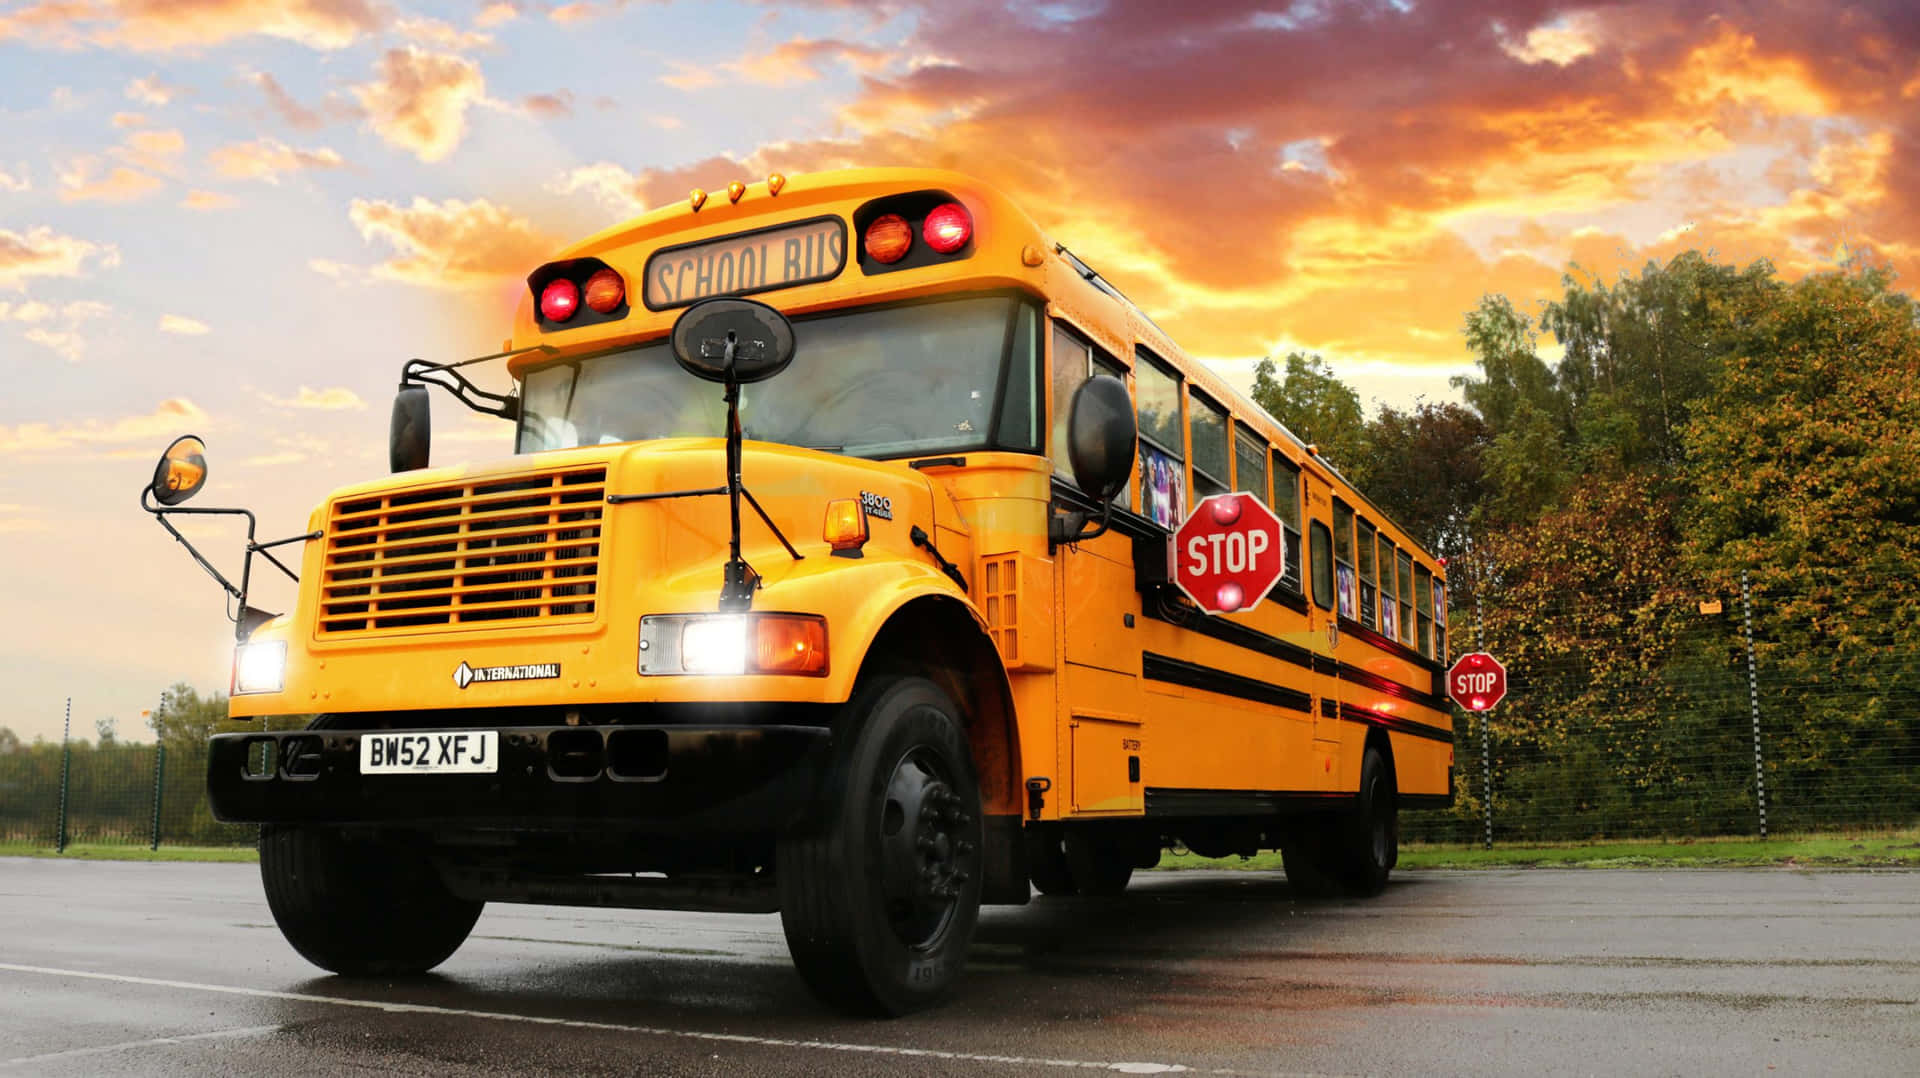 Classic Yellow School Bus on a Sunny Day Wallpaper